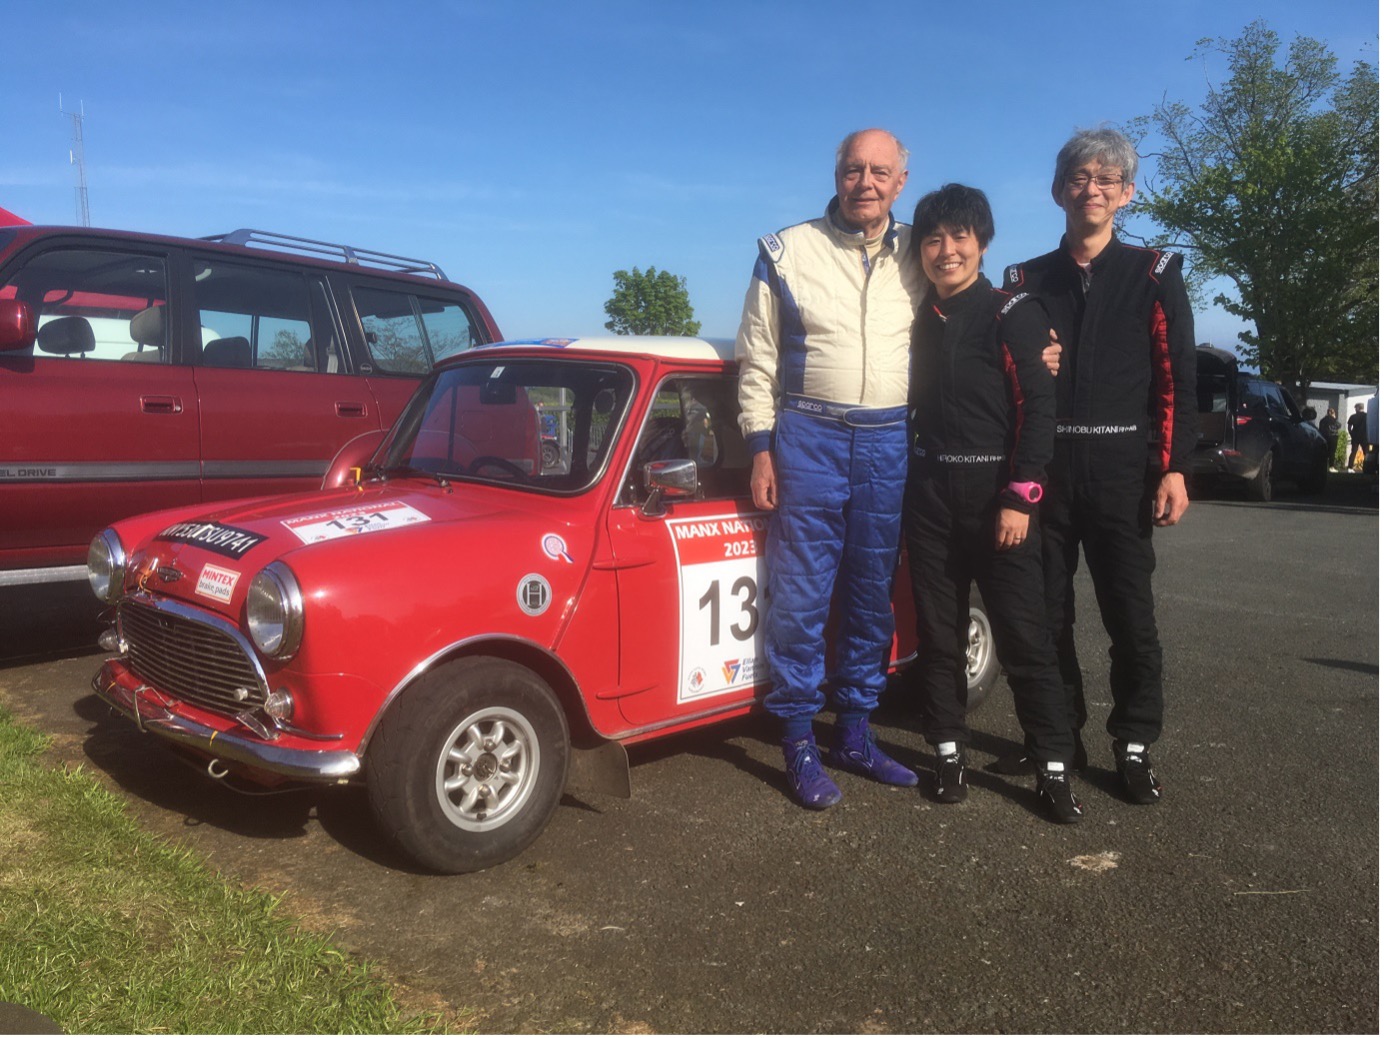 With my Japanese friends Shinobu and Hiroko with their immaculate Mini Cooper s